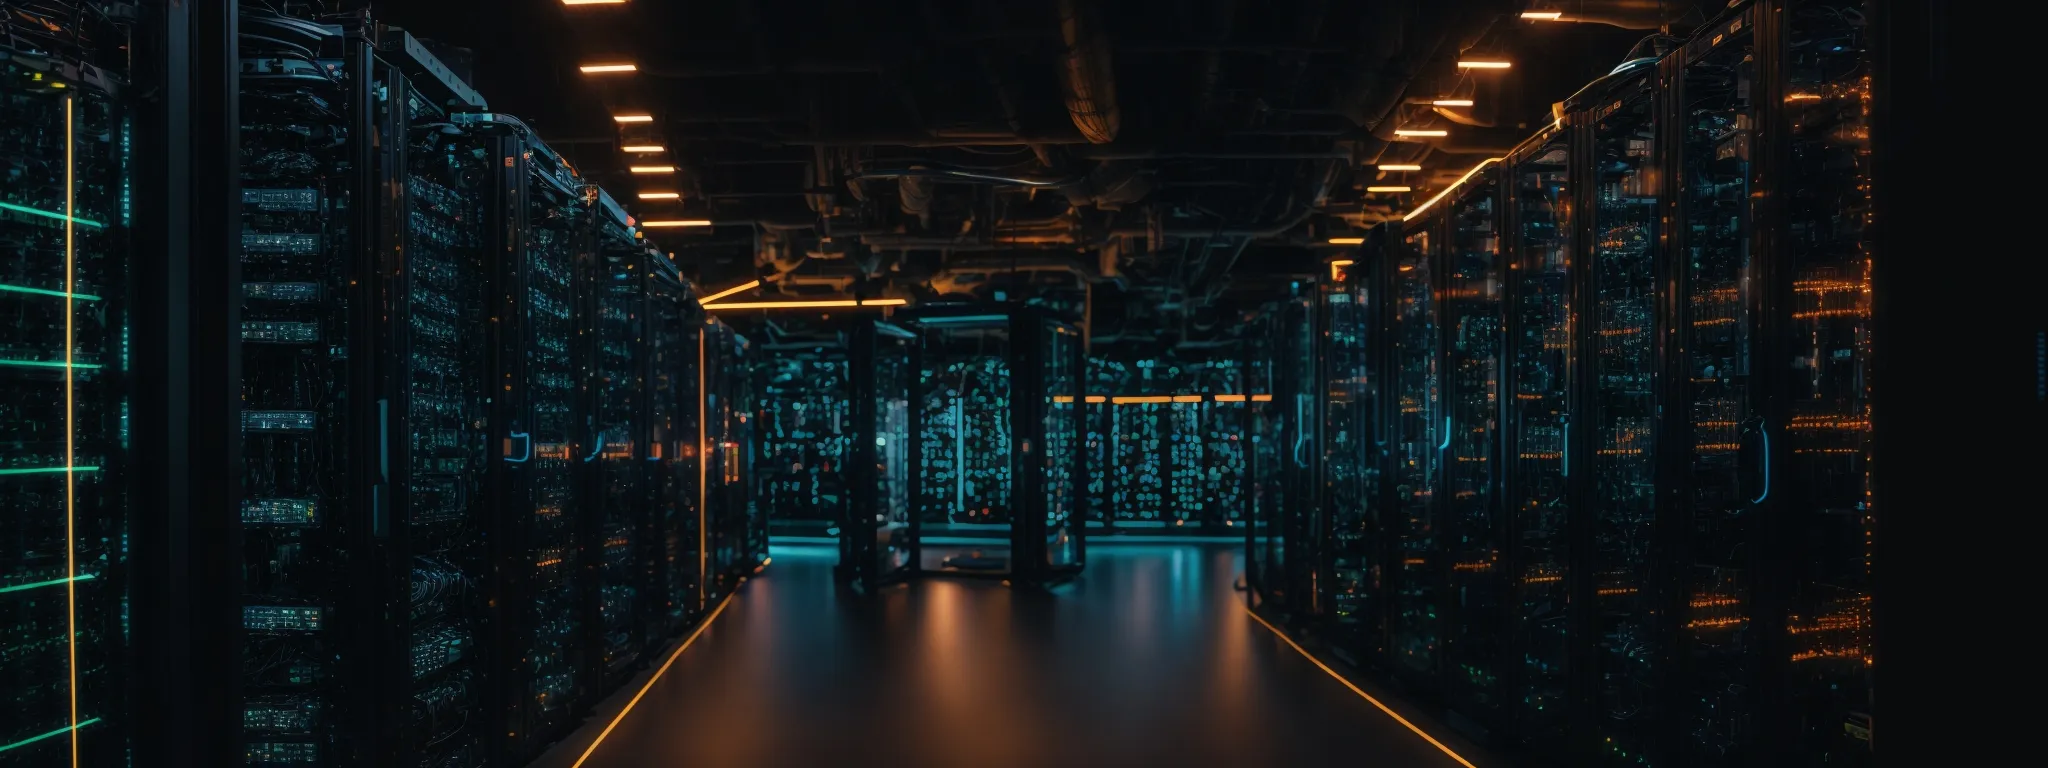 a vast server room with glowing indicators signifying active web services.